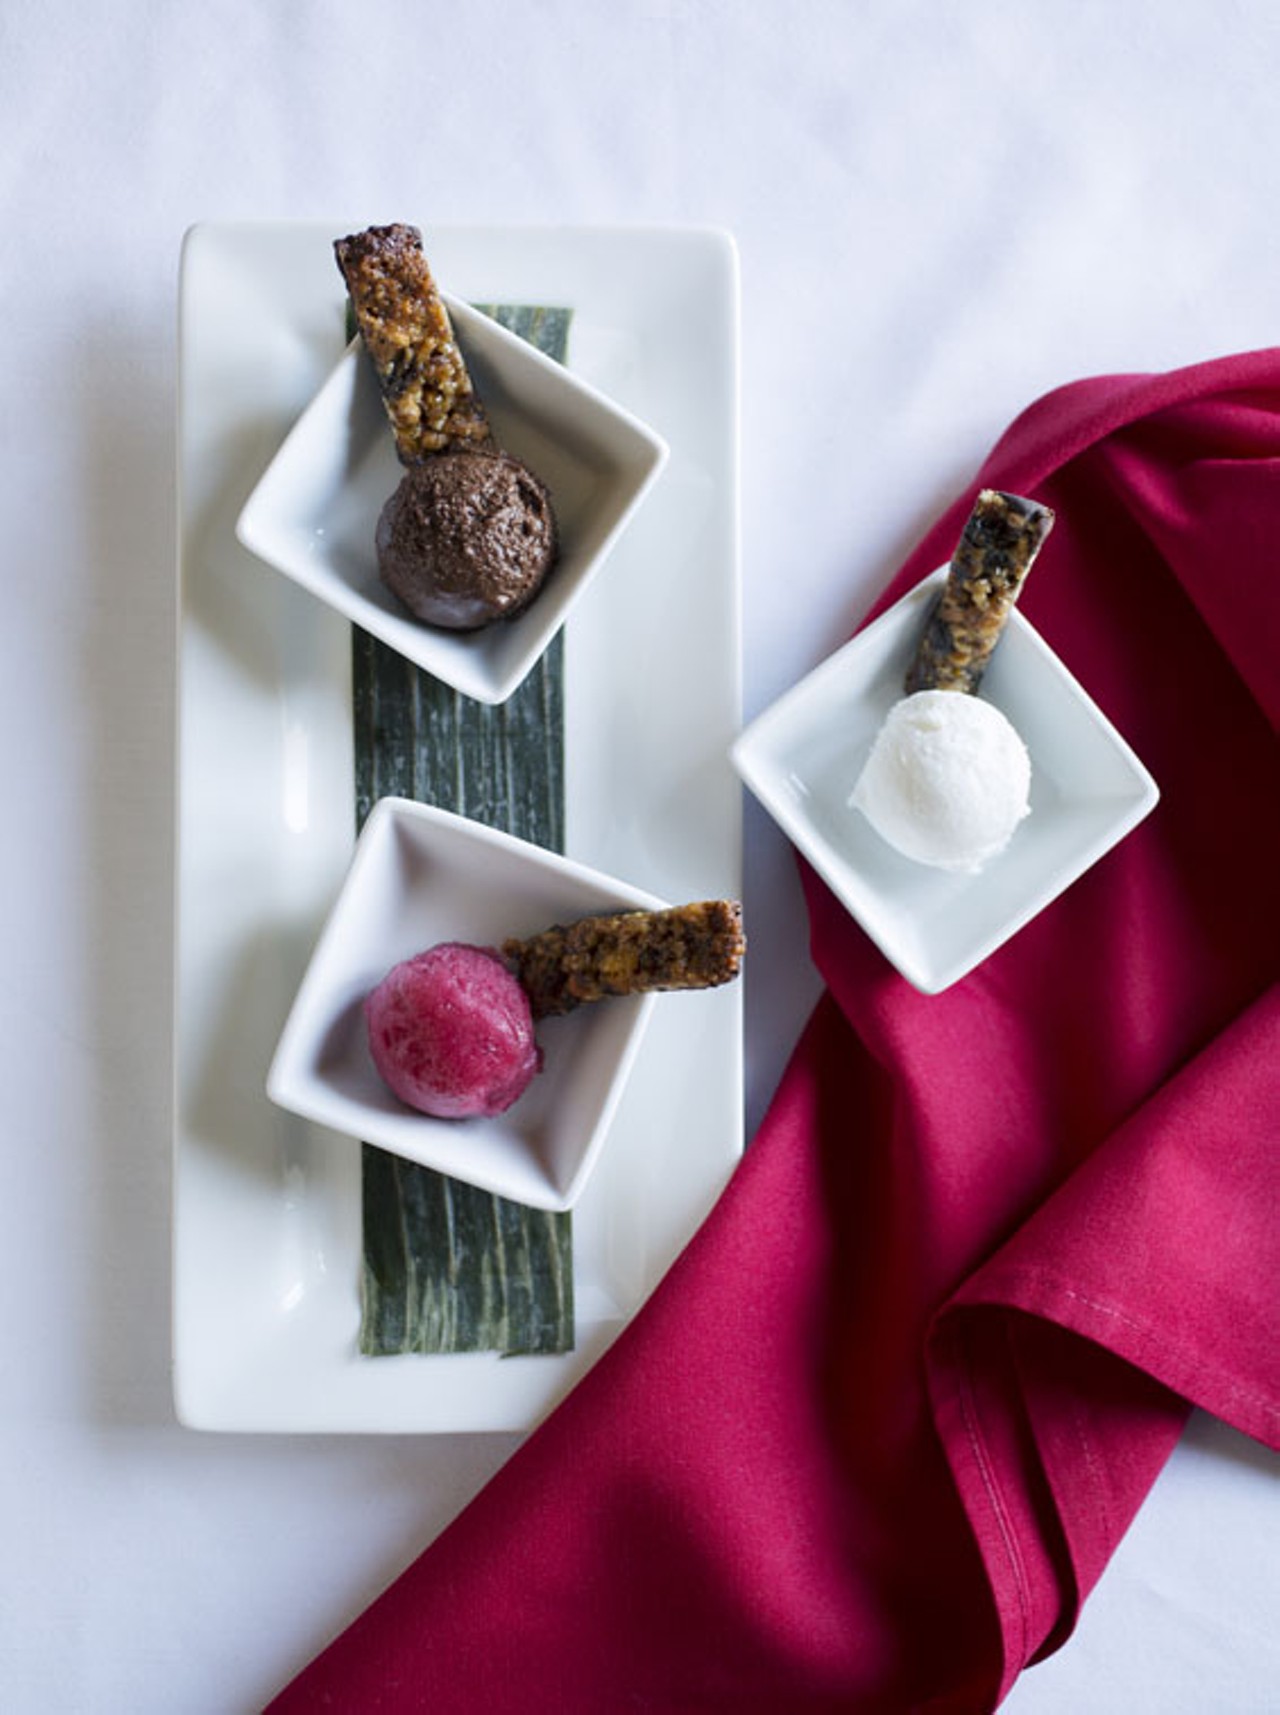 The "Sorbet Trio" features blackberries from Overlook, coconut and chile-chocolate.